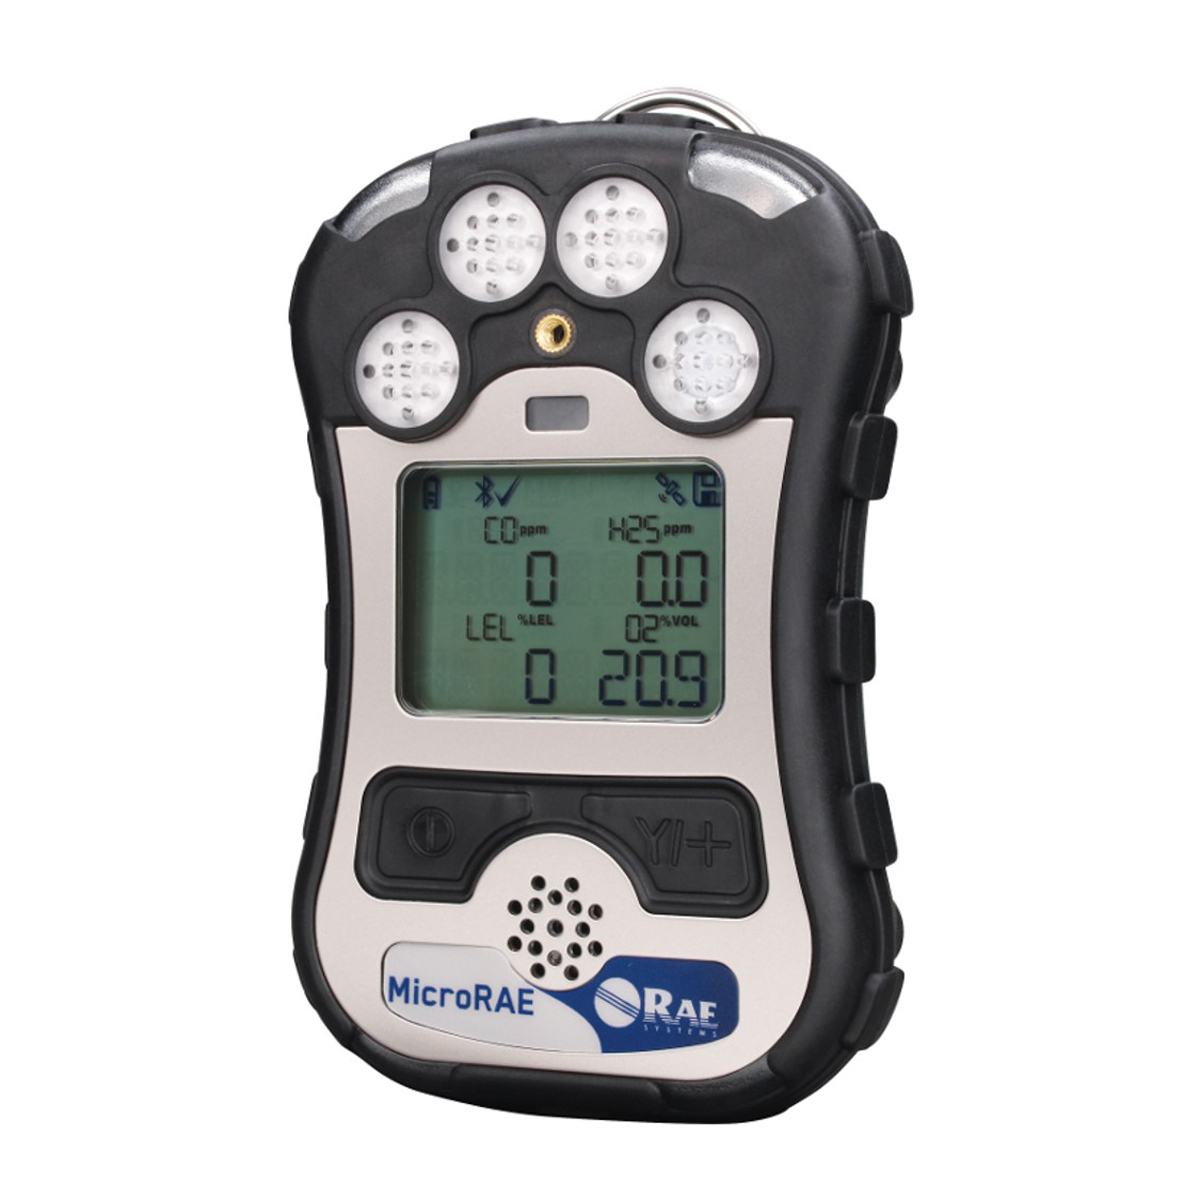 RAE® Systems MicroRAE™ Portable Combustible Gas, Hydrogen Cyanide, Carbon Monoxide And Oxygen Monitor